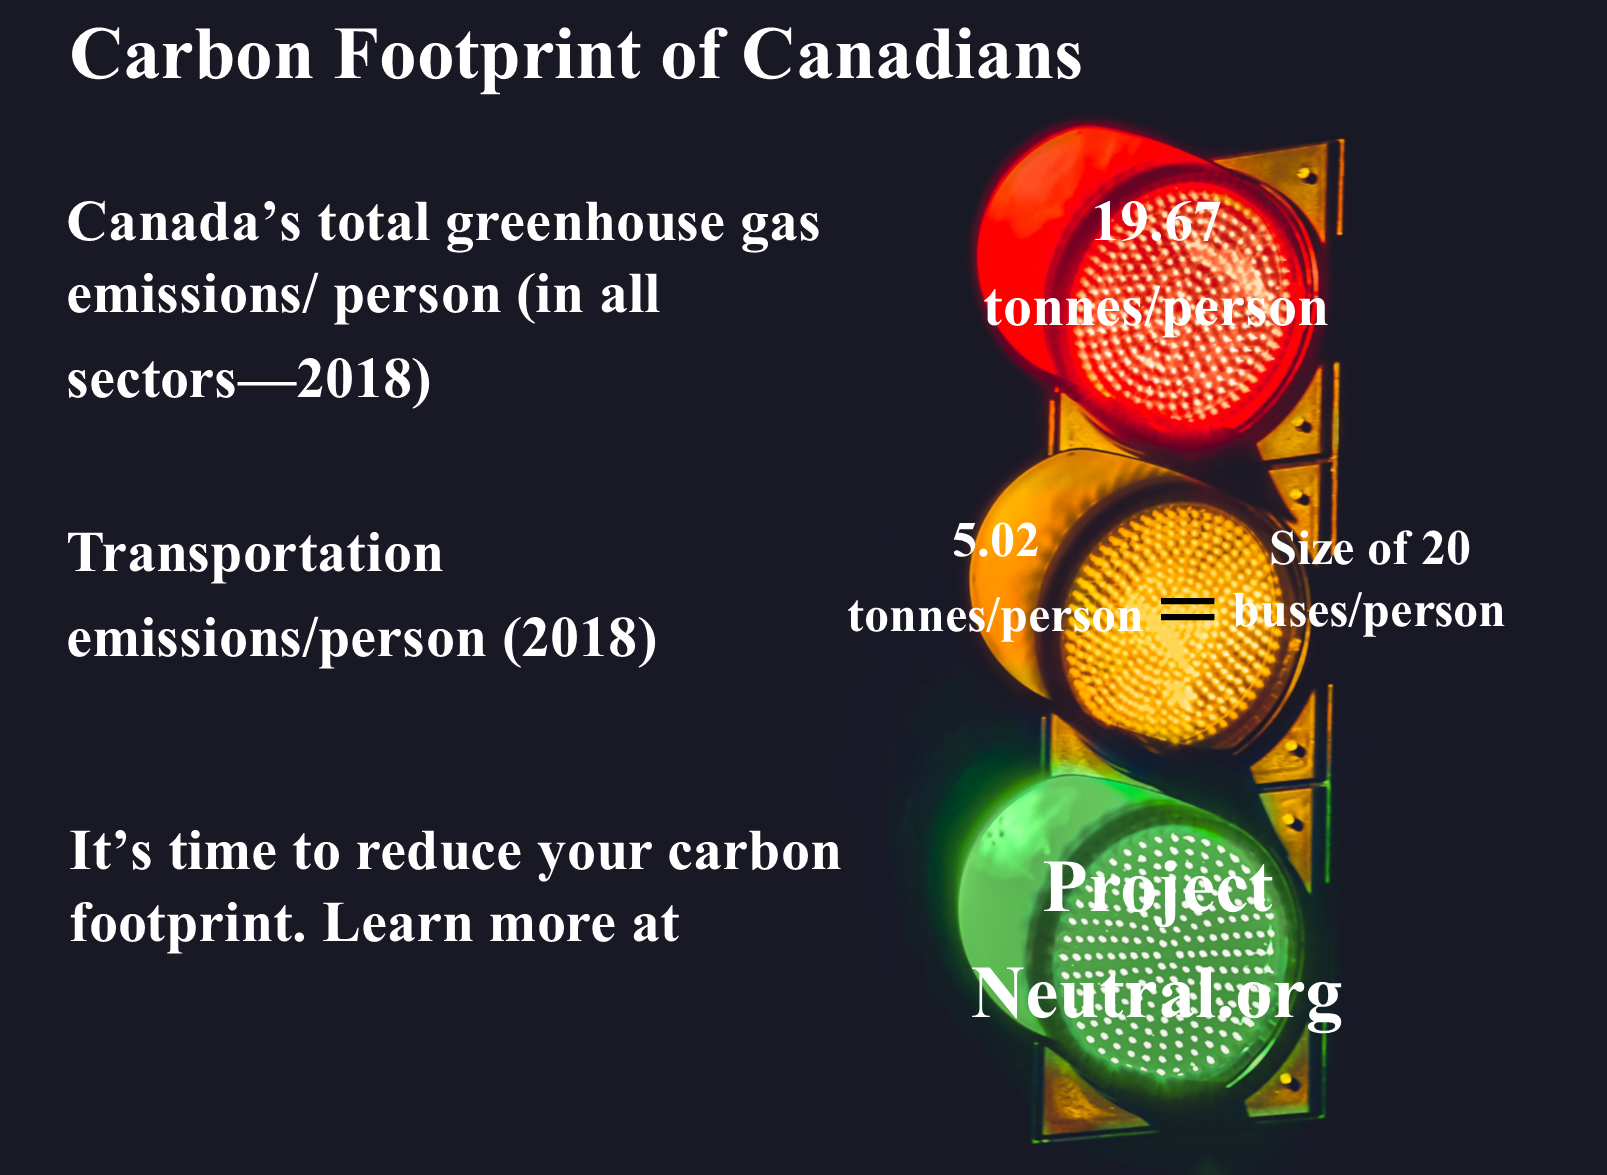 Small Steps to Reduce Your Carbon Footprint Can be One Giant Leap for Mankind by Shanella Ramkissoon